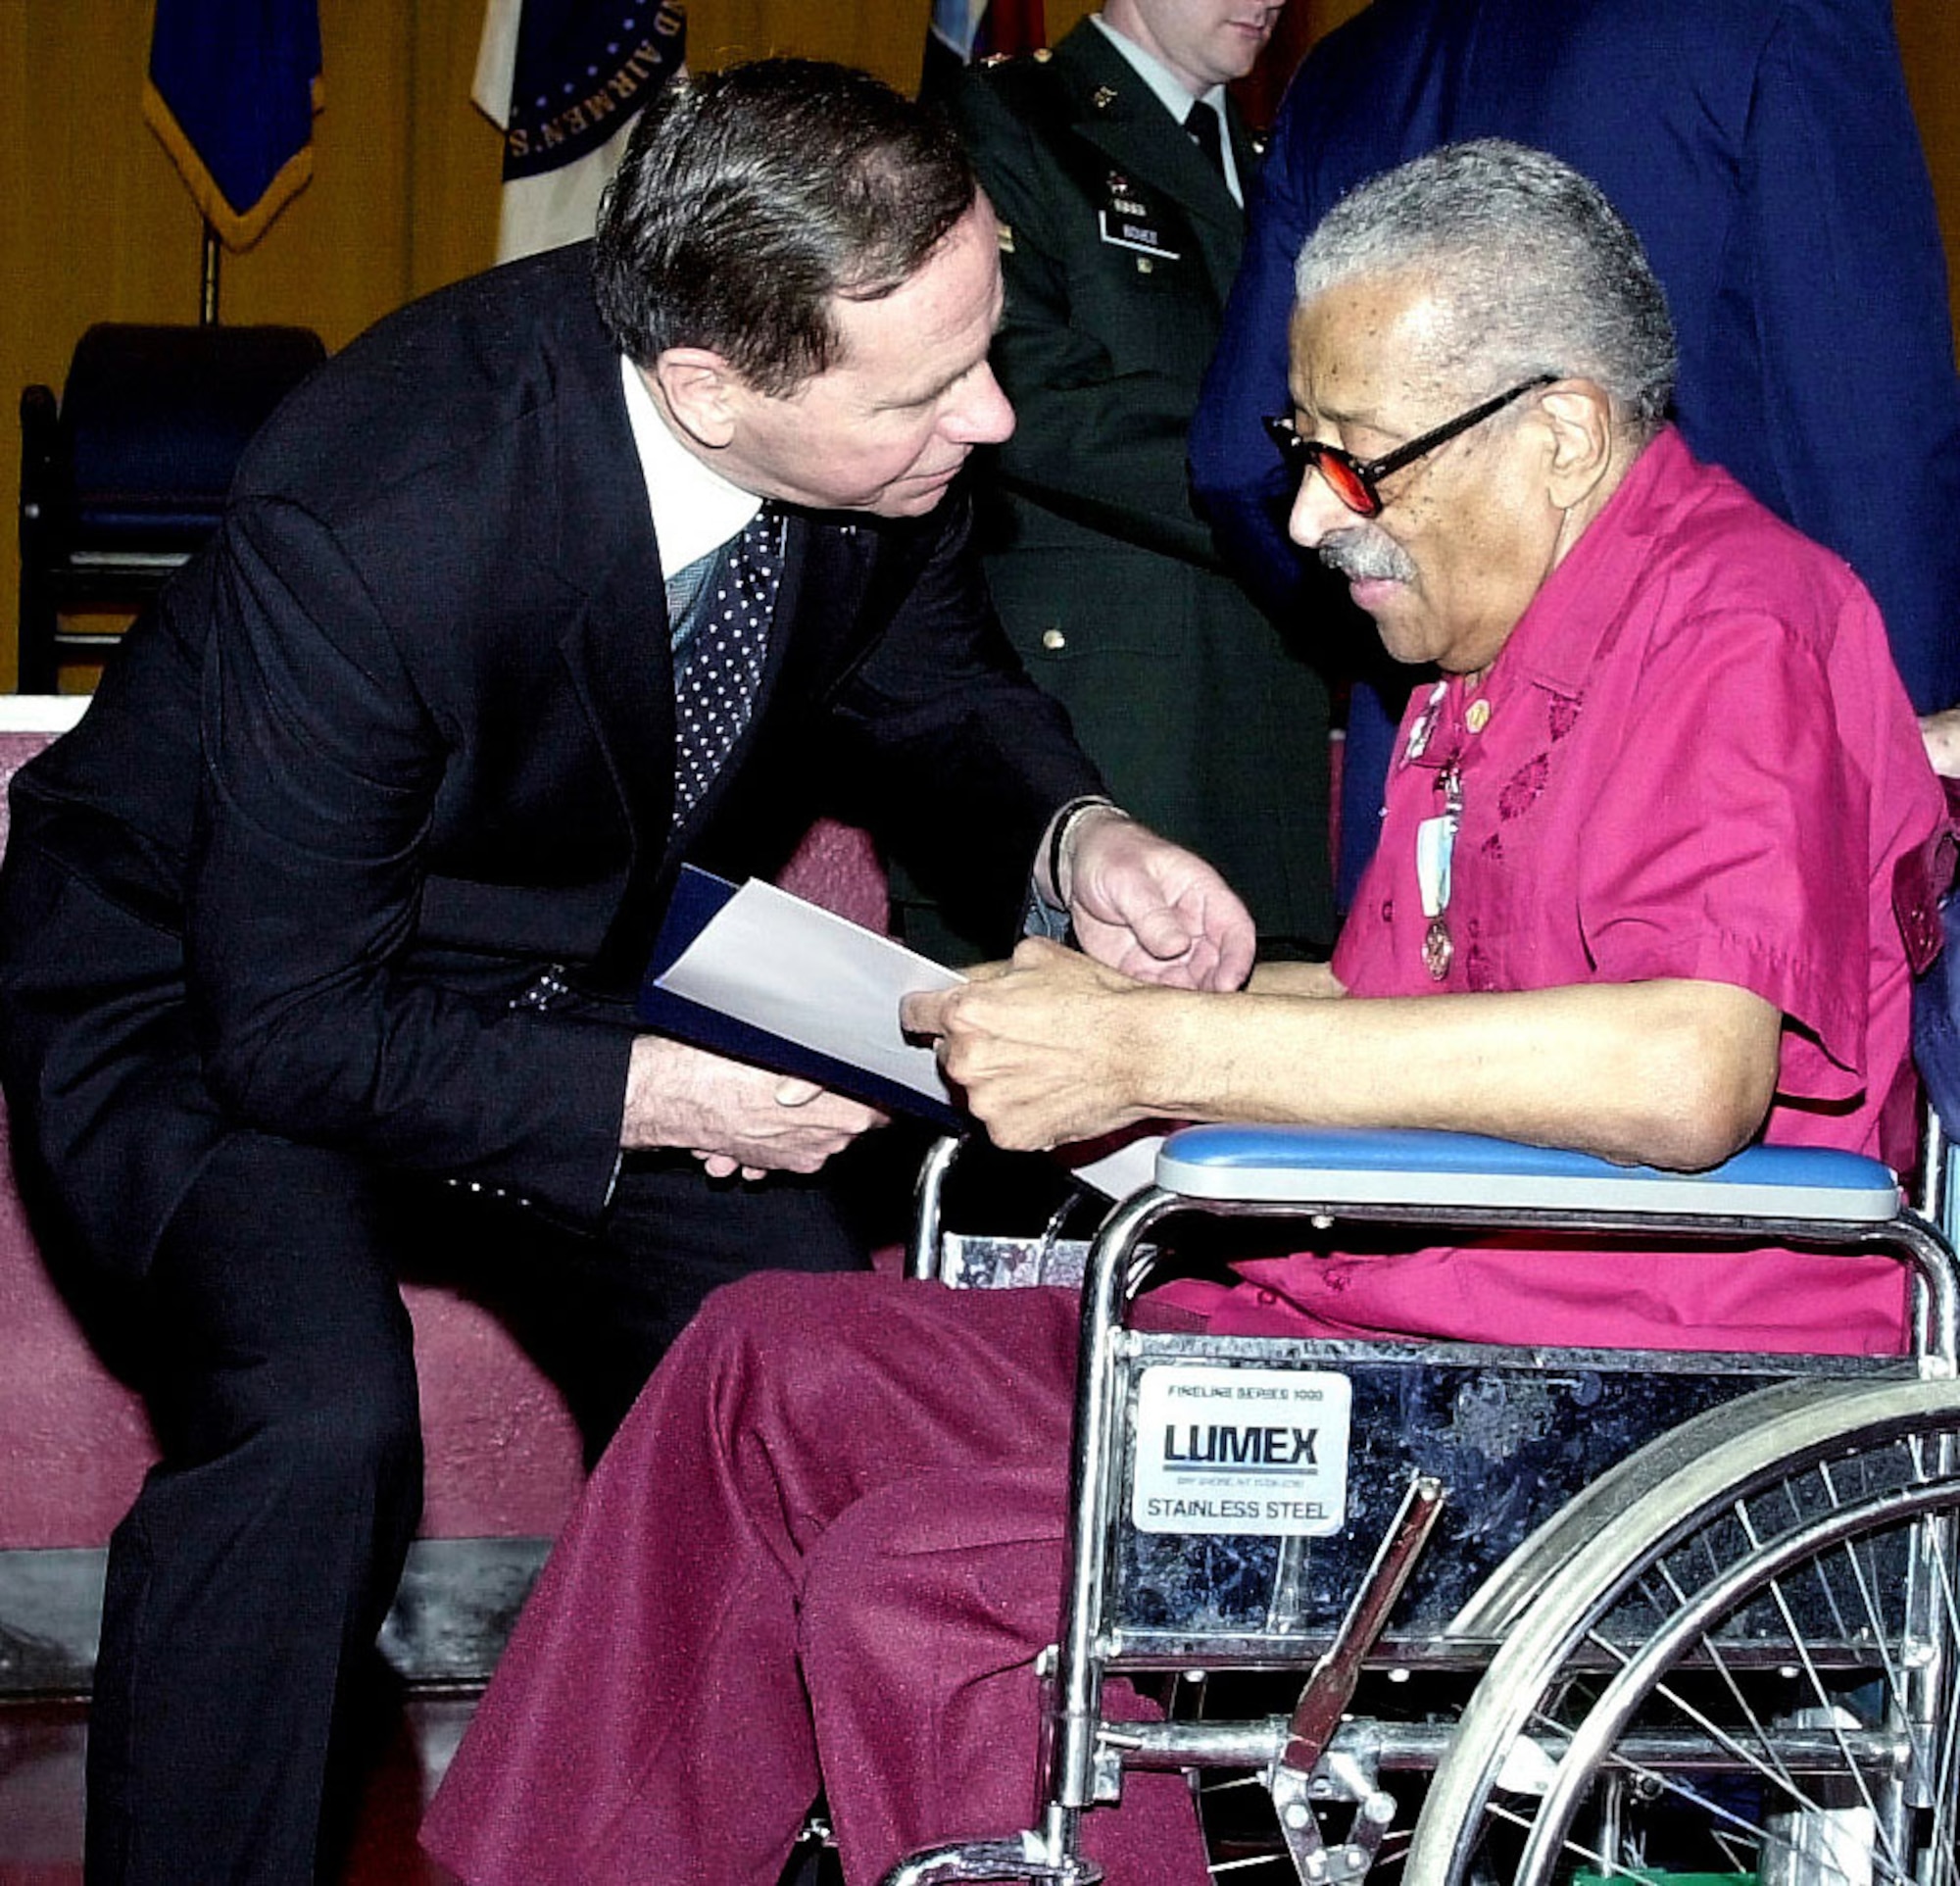 Recognition might come many years after the events. Here, Maj. Gen. (Ret.) Nels Running congratulates Eugene Mundy, who had just received the Korean War Service Medal from the Republic of Korea during a ceremony at the U.S. Soldiers’ and Airmen’s Home in Washington, D.C., in April 2001. Mundy, who served in the Air Force during the Korean War, was one of 34 veterans honored that day as part of the 50th anniversary of the Korean War. (U.S. Air Force photo)